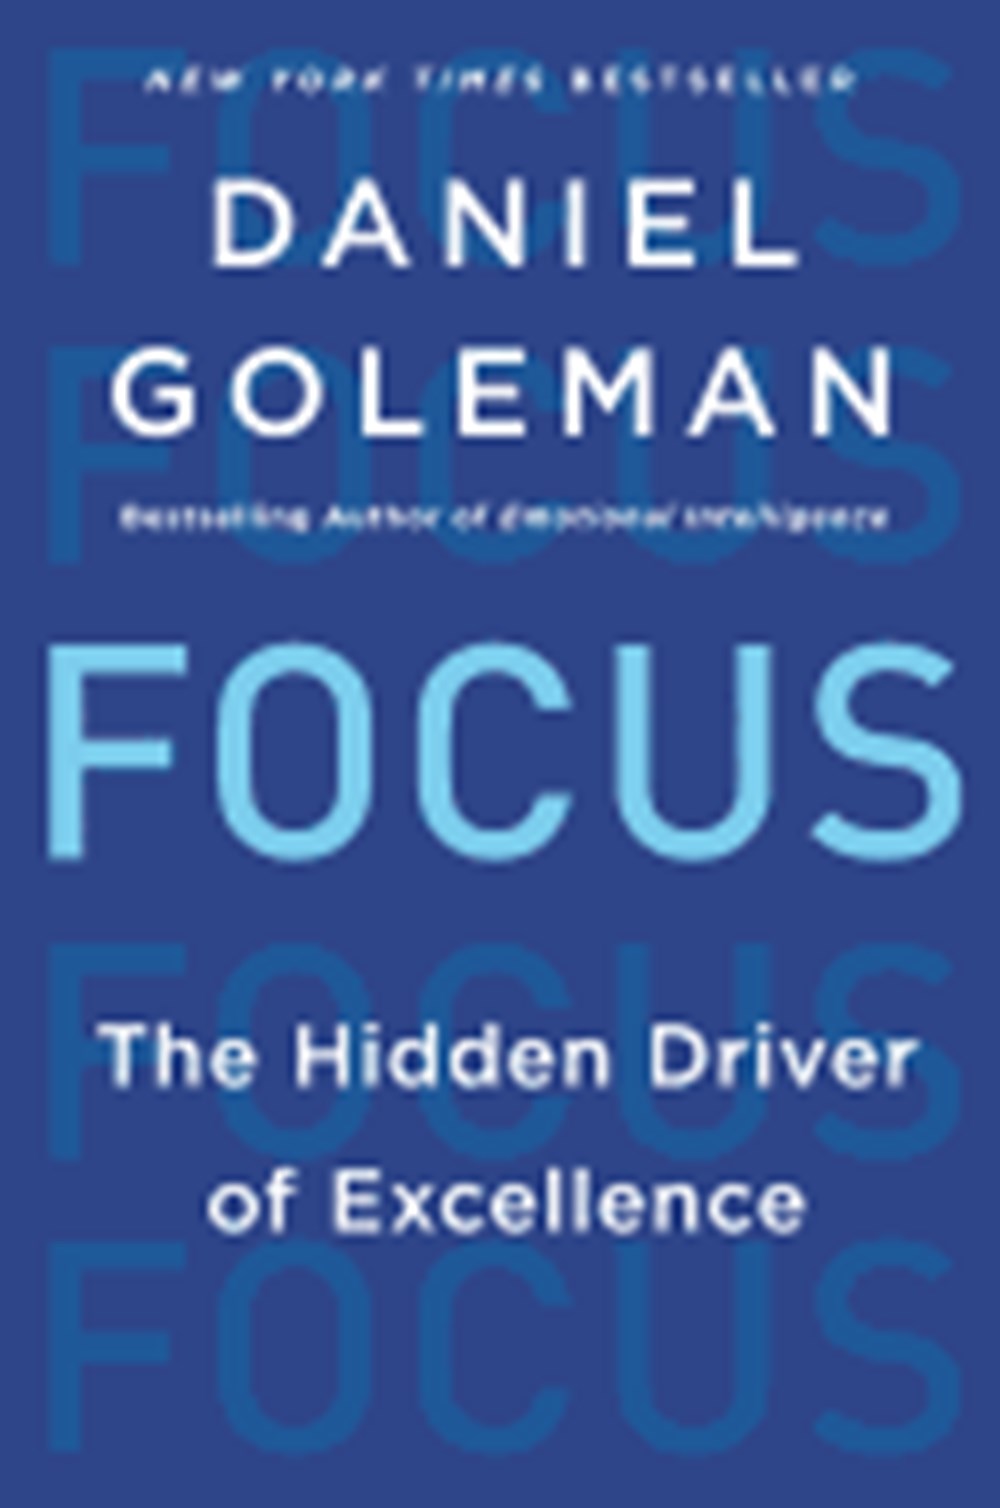 Focus The Hidden Driver of Excellence